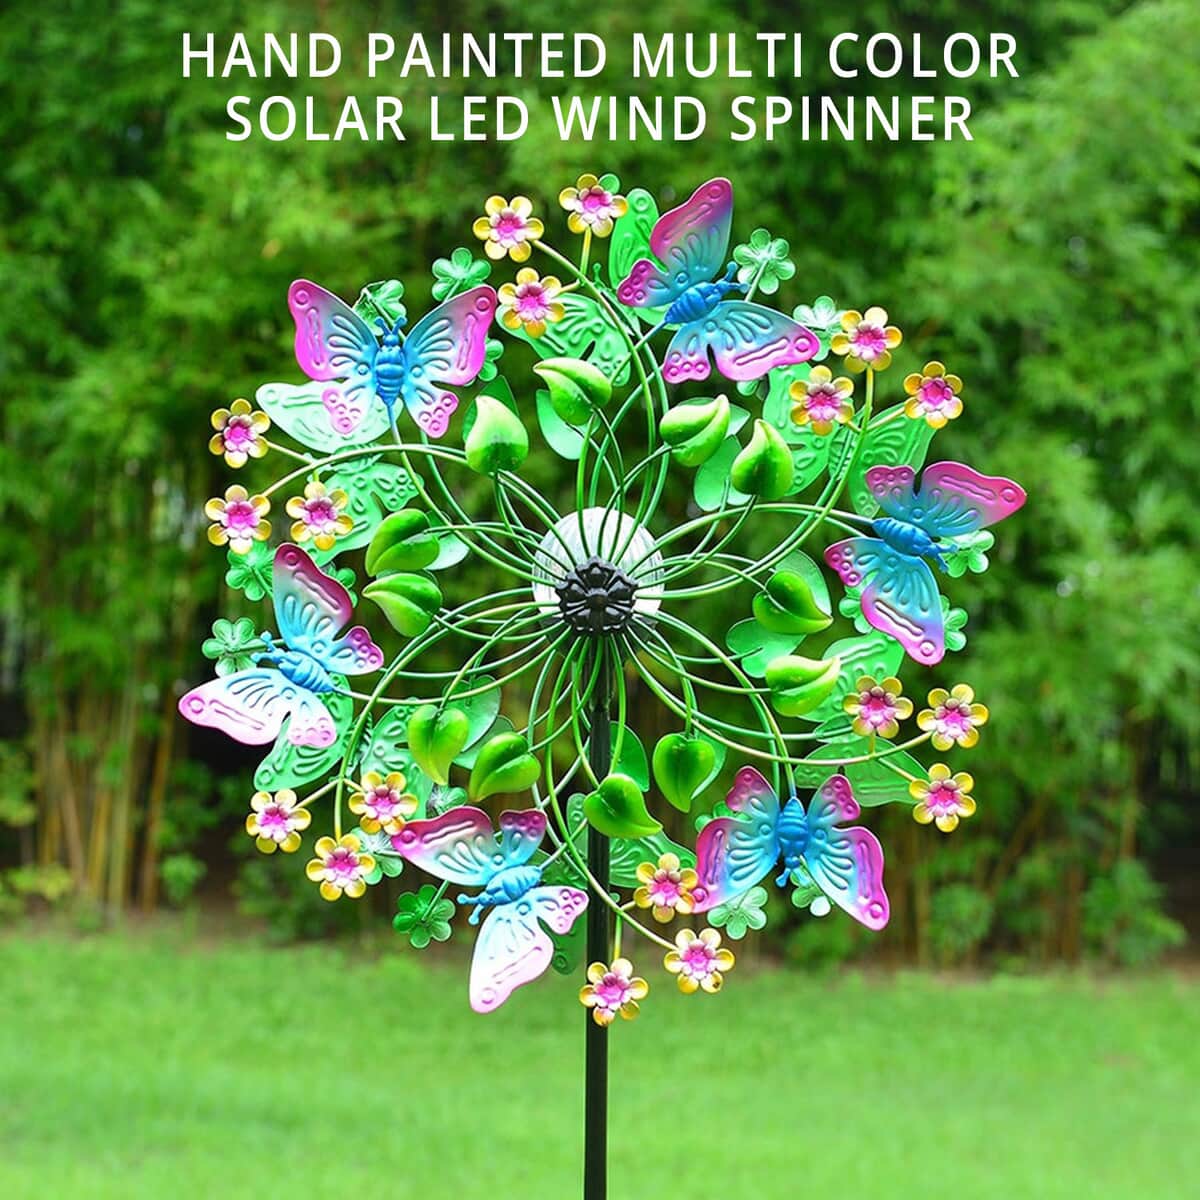 Hand Painted Multi Color Floral Butterfly Solar LED Wind Spinner -Adjustable Height up to 70 Inches image number 1